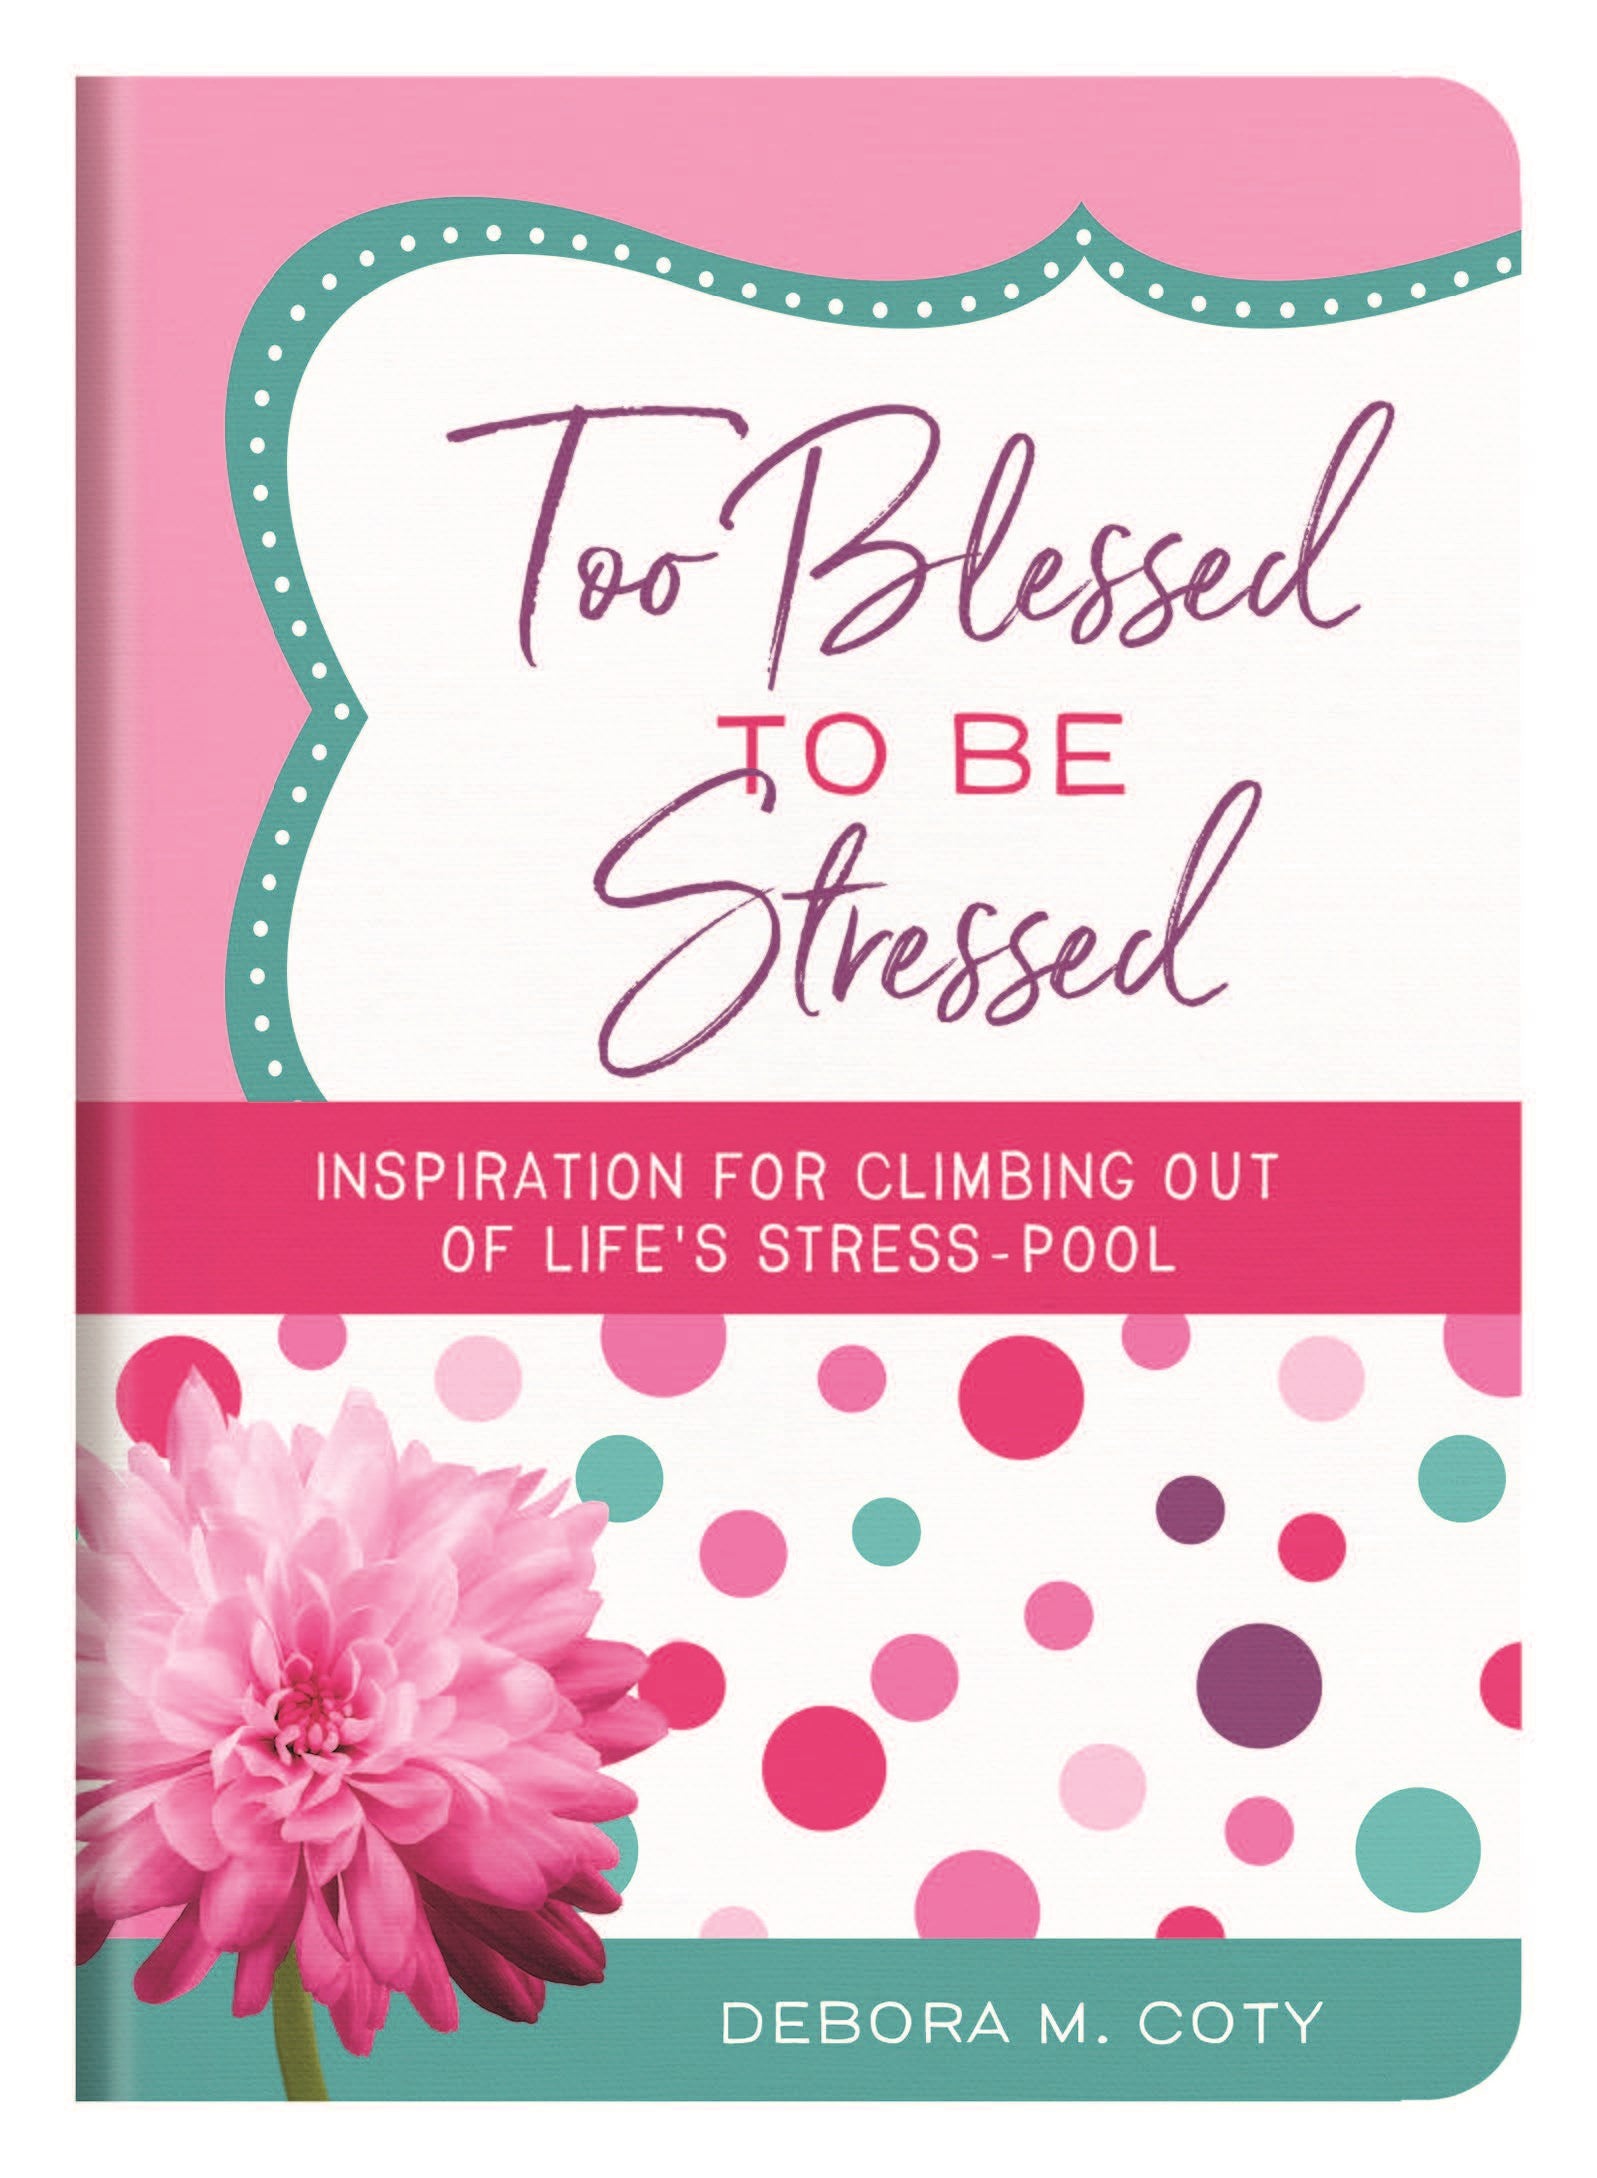 Image of Too Blessed to Be Stressed other